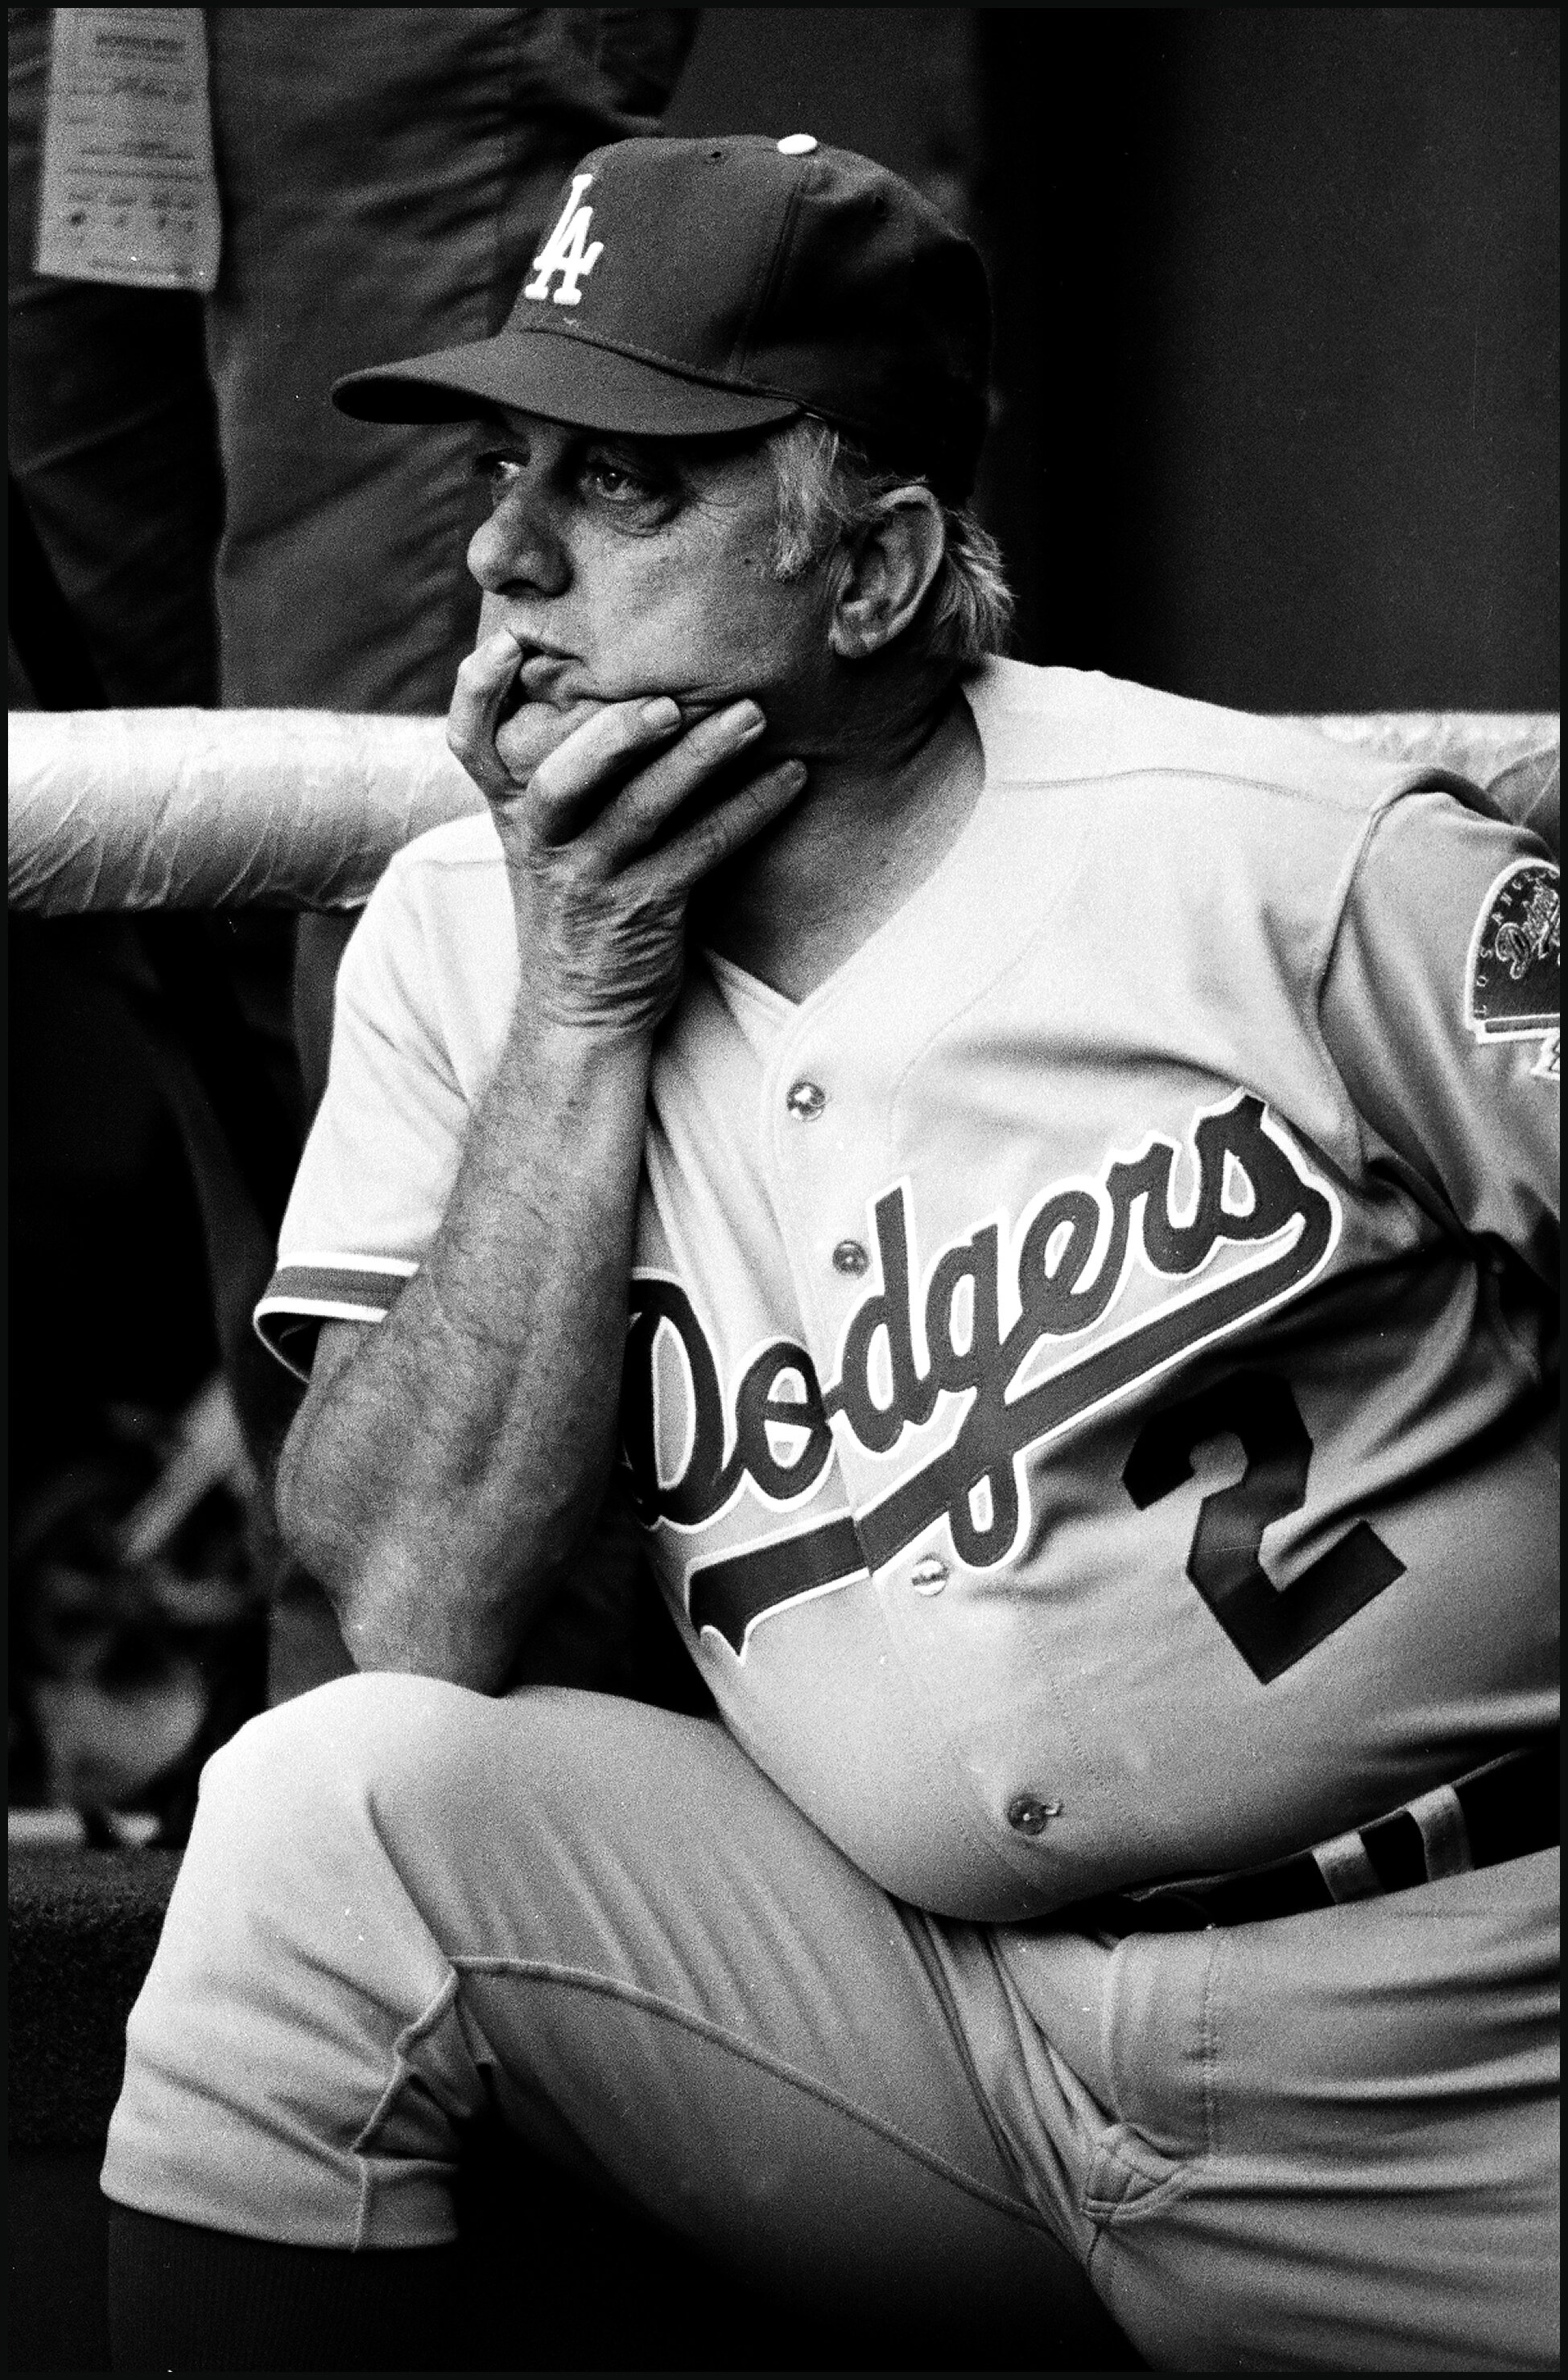  LOS ANGELES, CA - 1983: Manager Tommy Lasorda #2 of the Los Angeles Dodgers looks on from the dugout during a game at Dodger Stadium, Los Angeles, California. (Photo by Jayne Kamin-Oncea/Getty Images) 